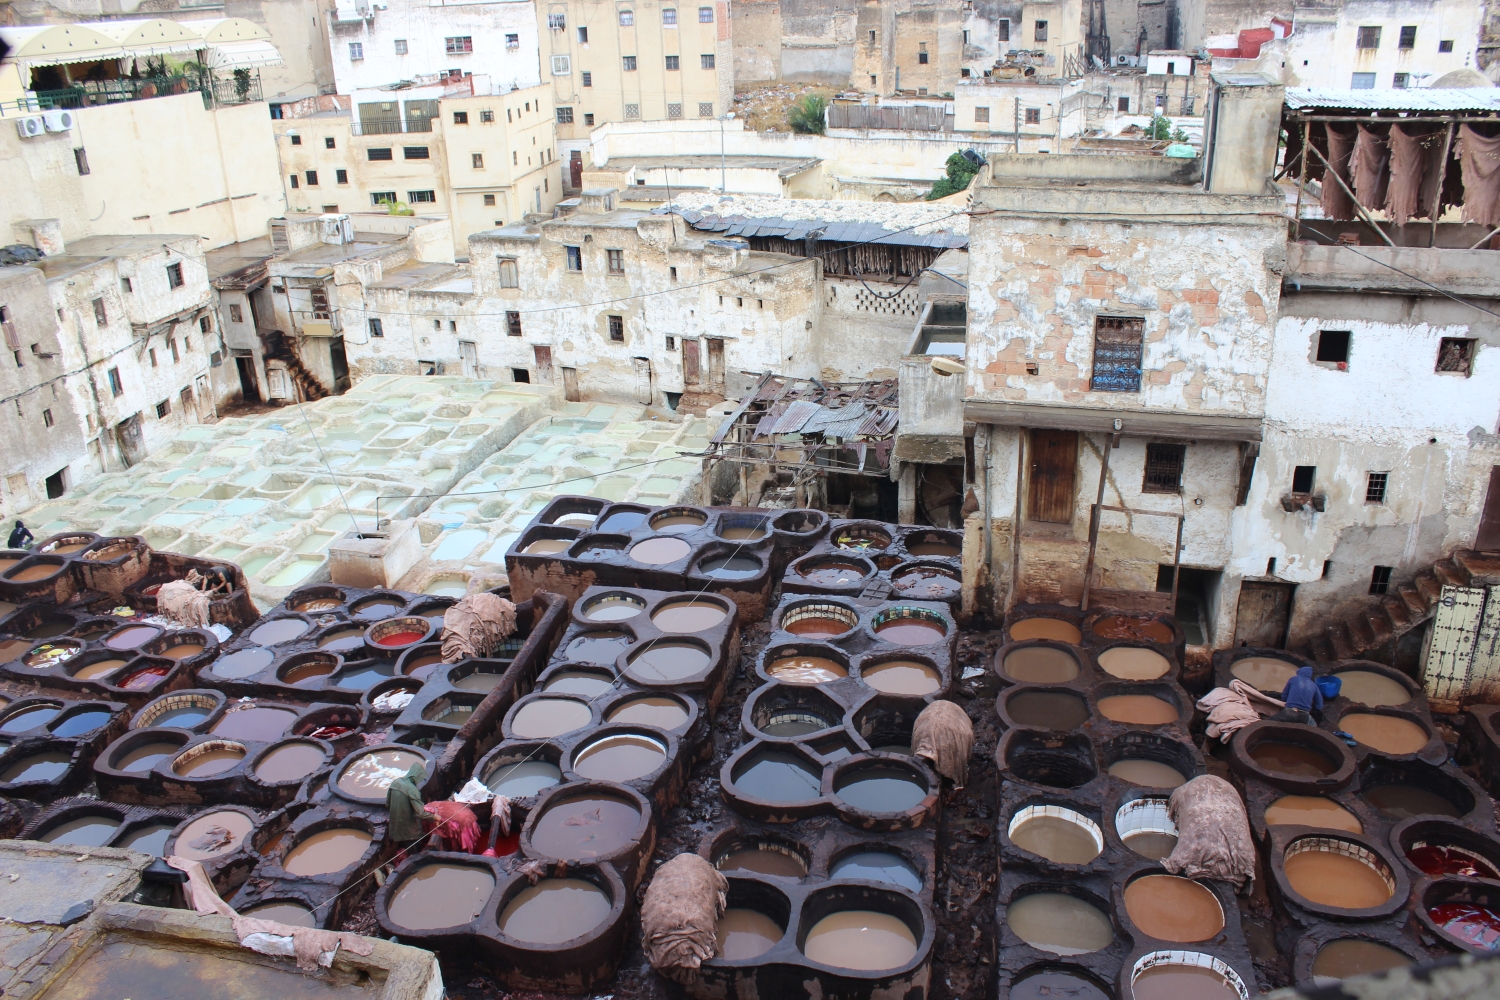 General view of the tannery